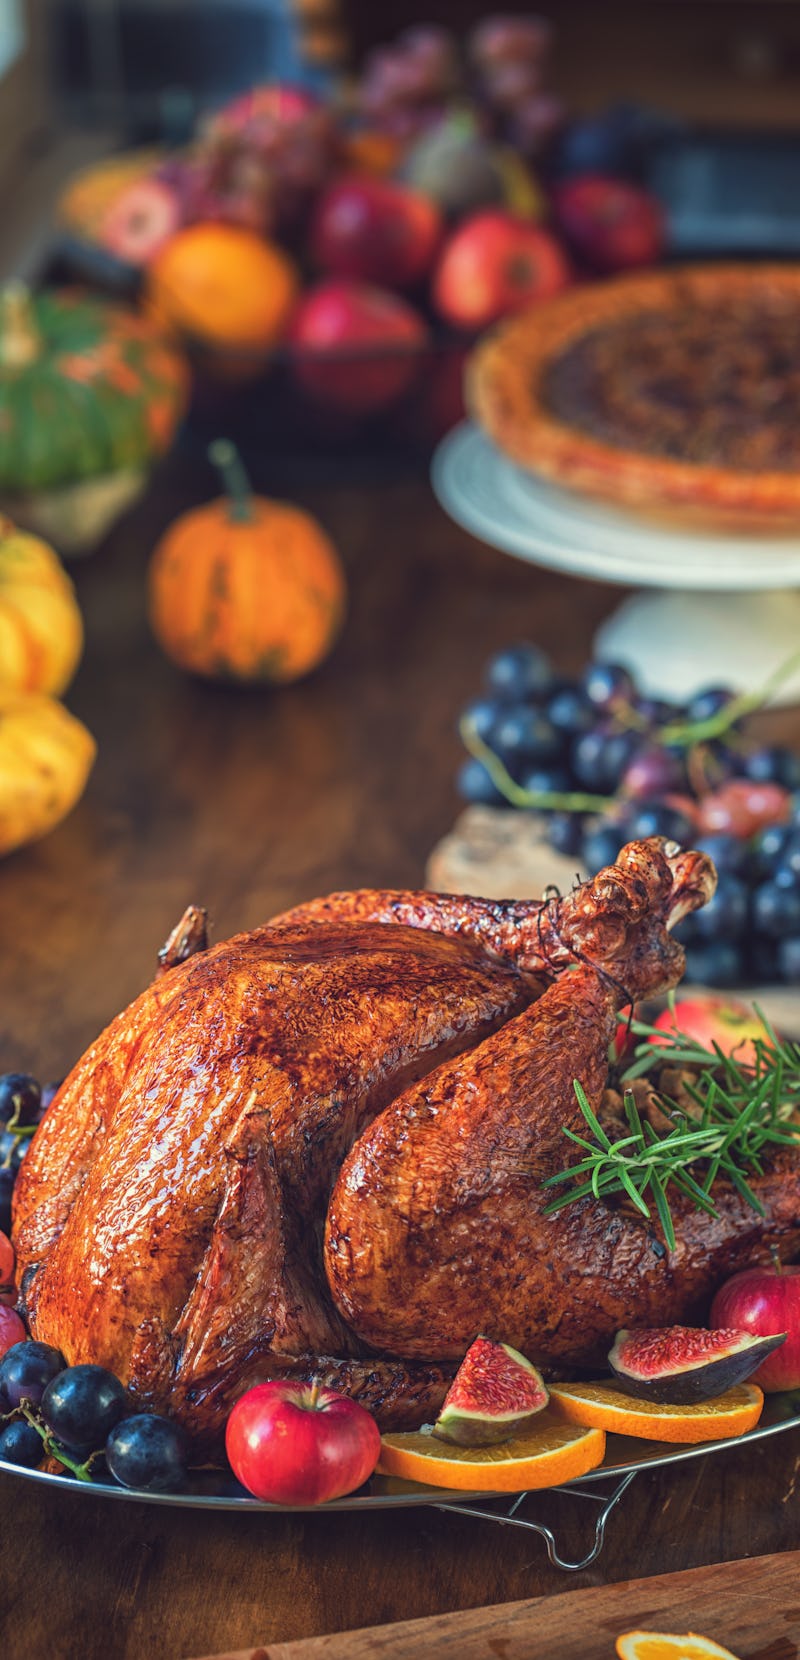 Traditional stuffed turkey with side dishes for Thanksgiving celebration